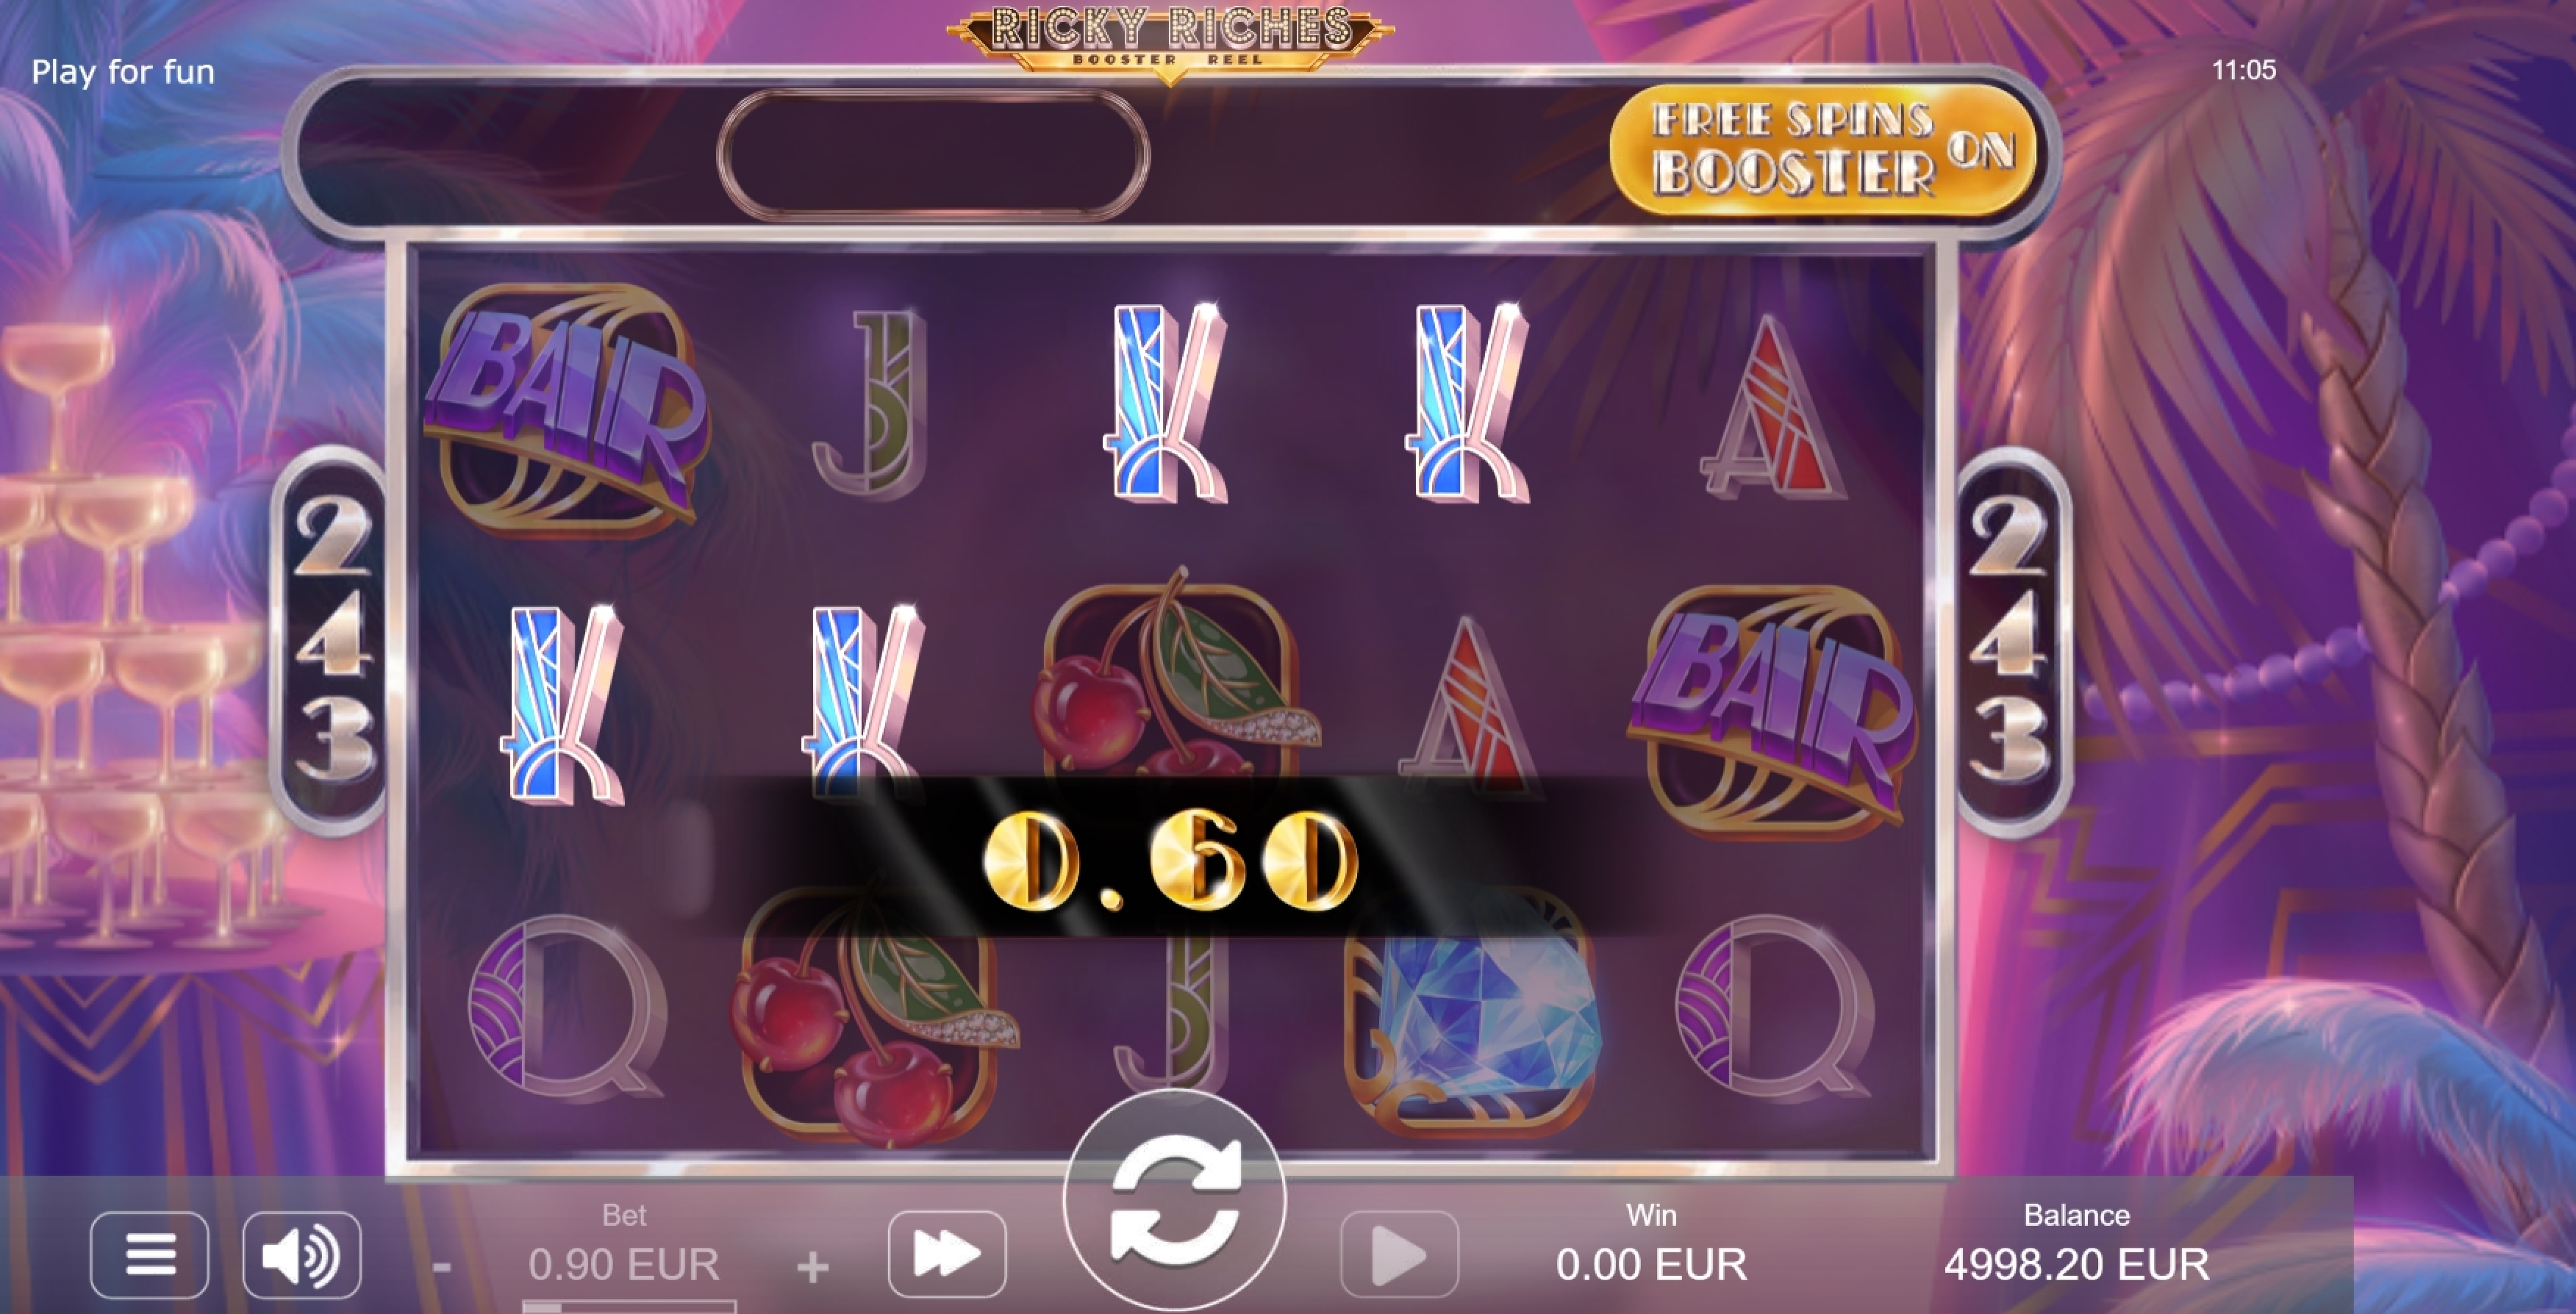 Win Money in Ricky Riches Free Slot Game by STHLM Gaming